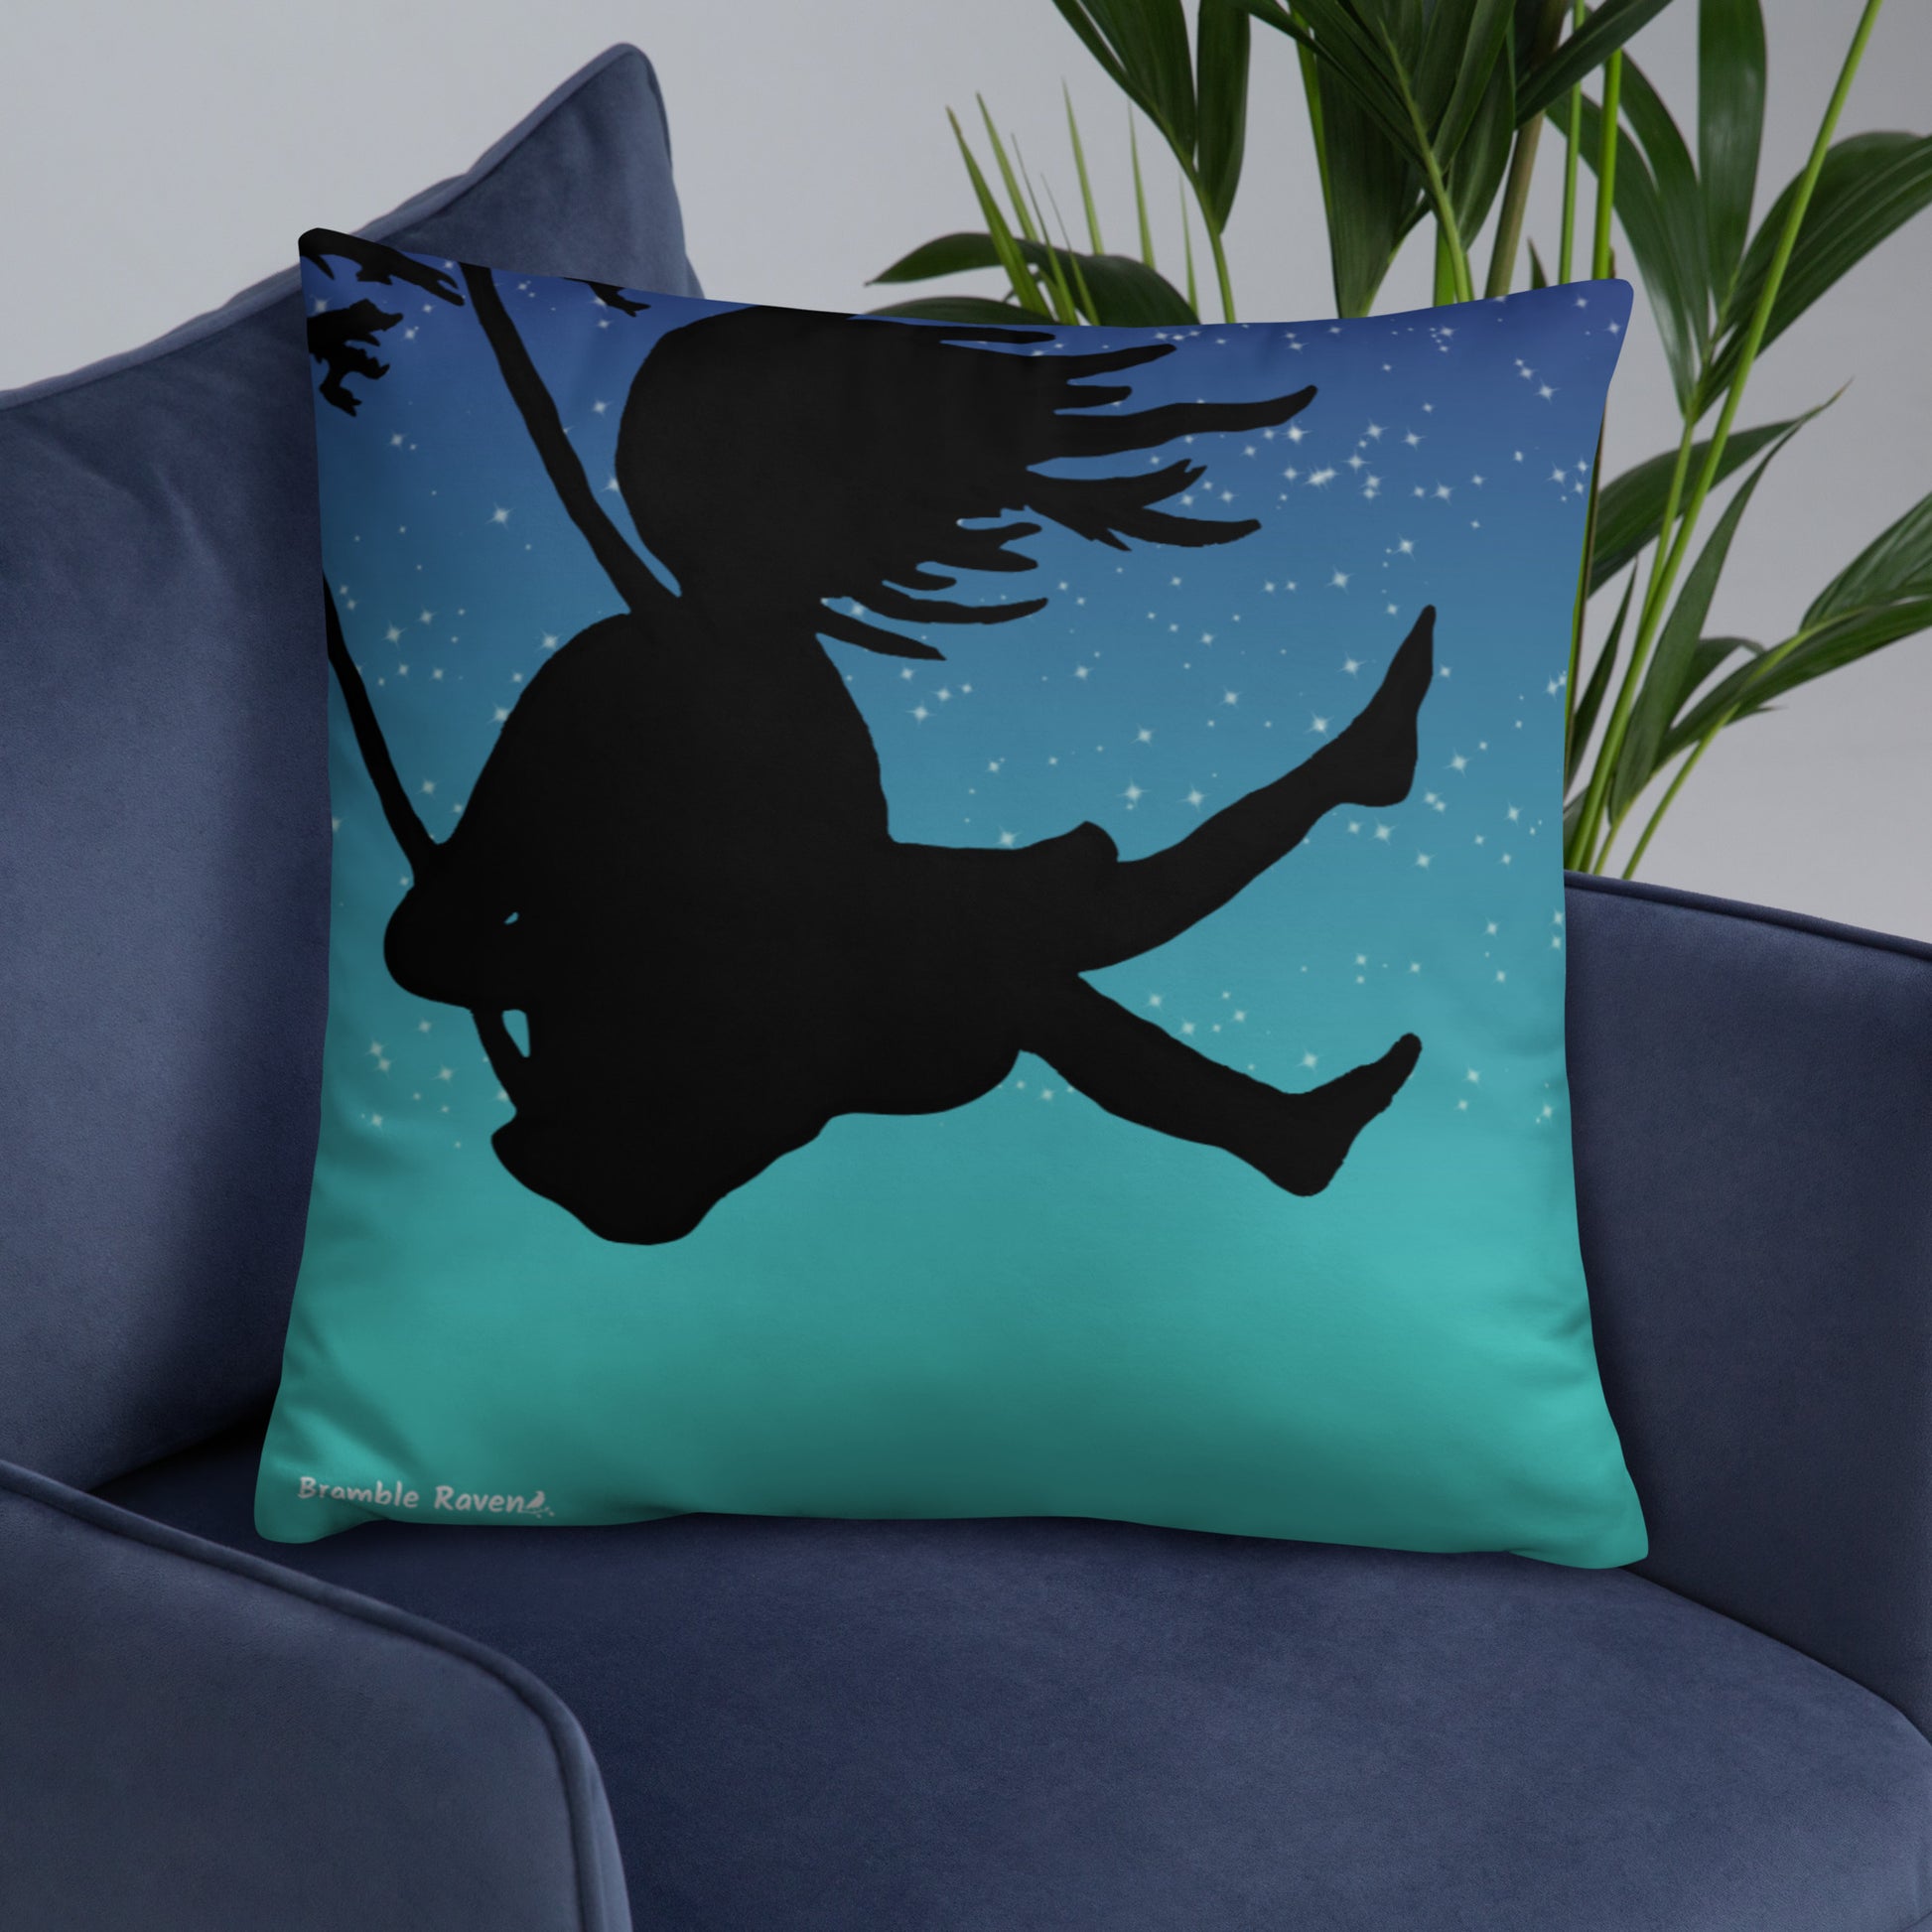 Original Swing Free design of a girl's silhouette in a tree swing against the backdrop of a blue starry sky. Pillow has design on both sides. 22 by 22inch accent pillow. Image shows back which has the design covering the entire side. Shown on blue sofa.